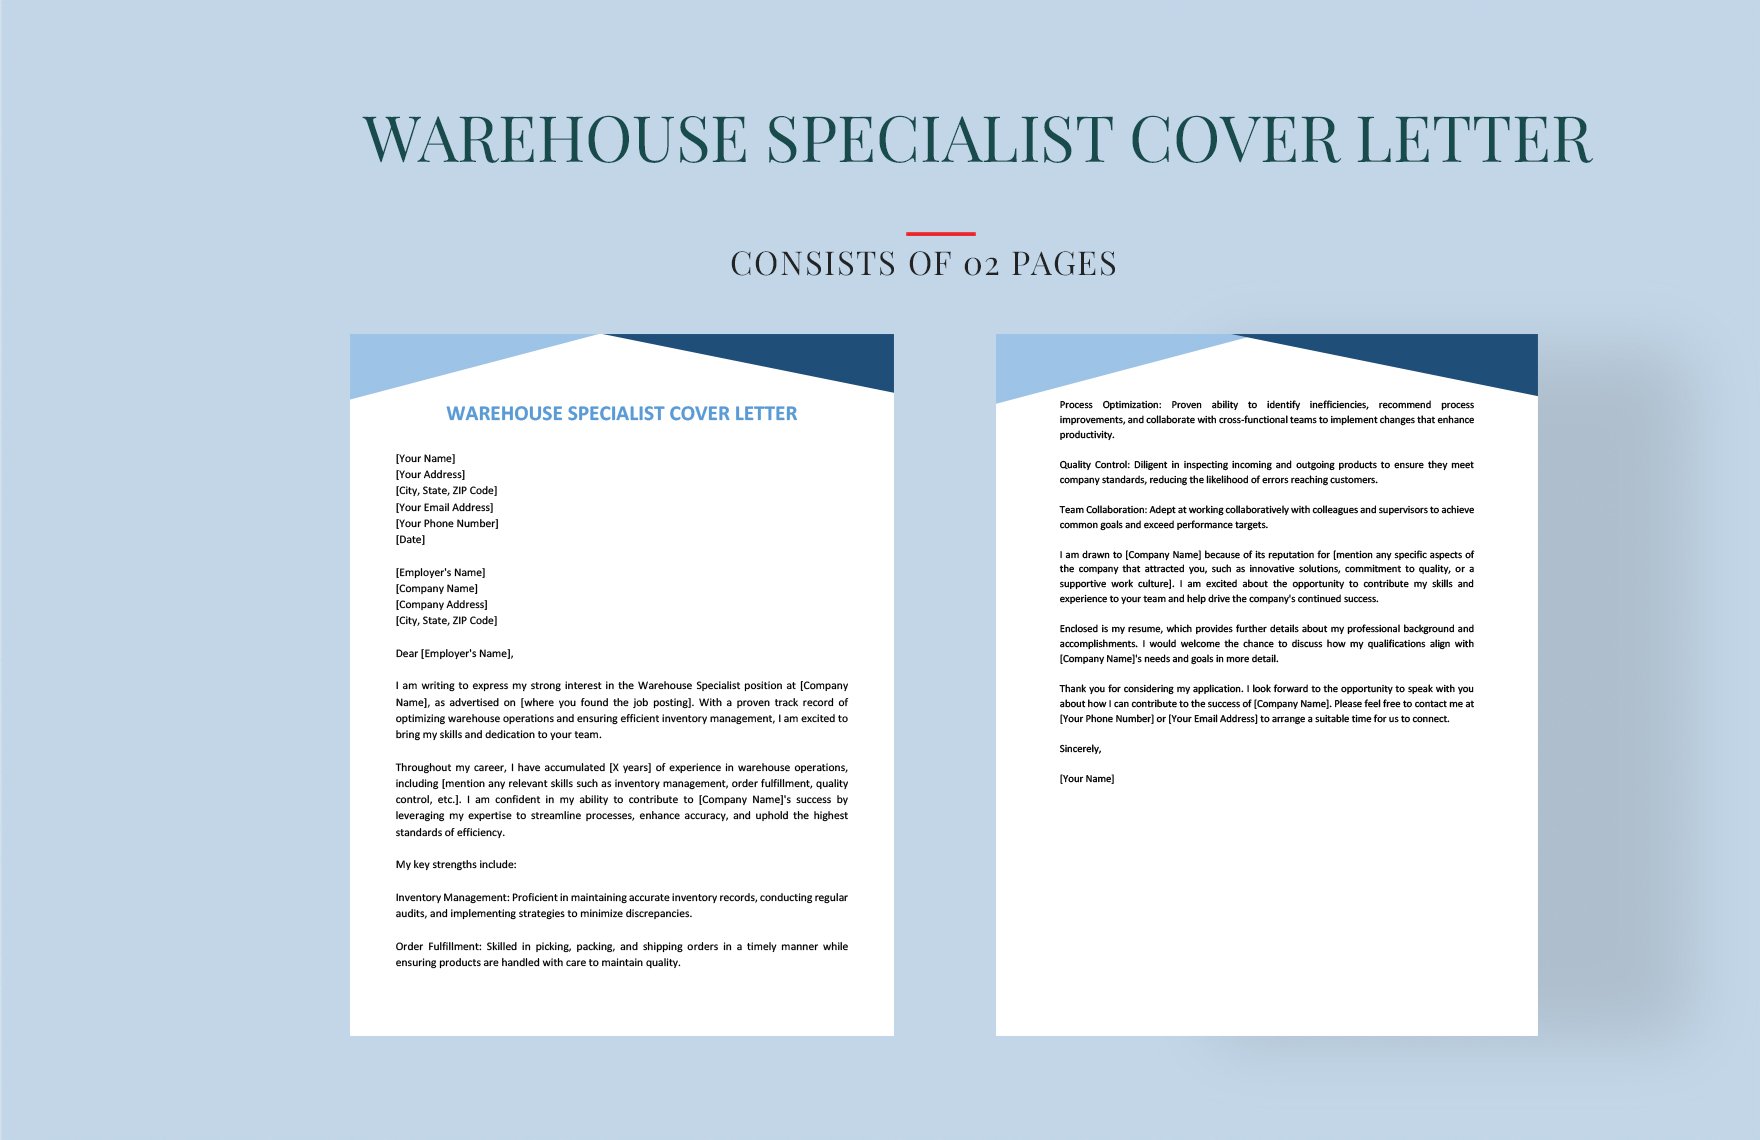 Warehouse Specialist Cover Letter